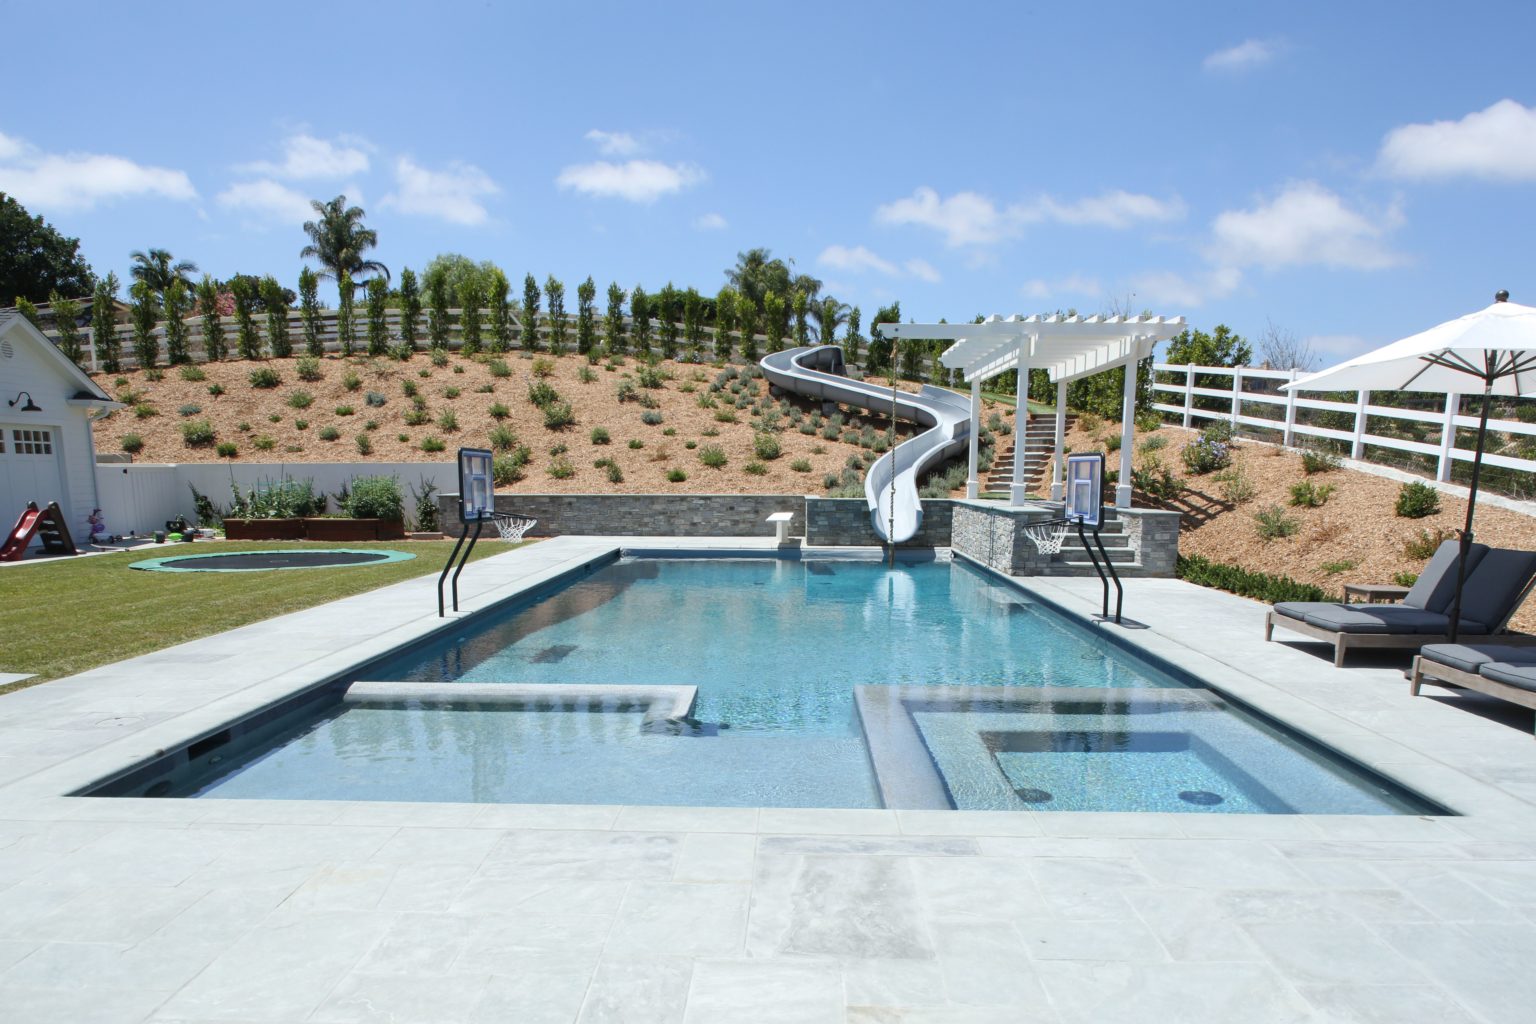 Swimming pool with slides